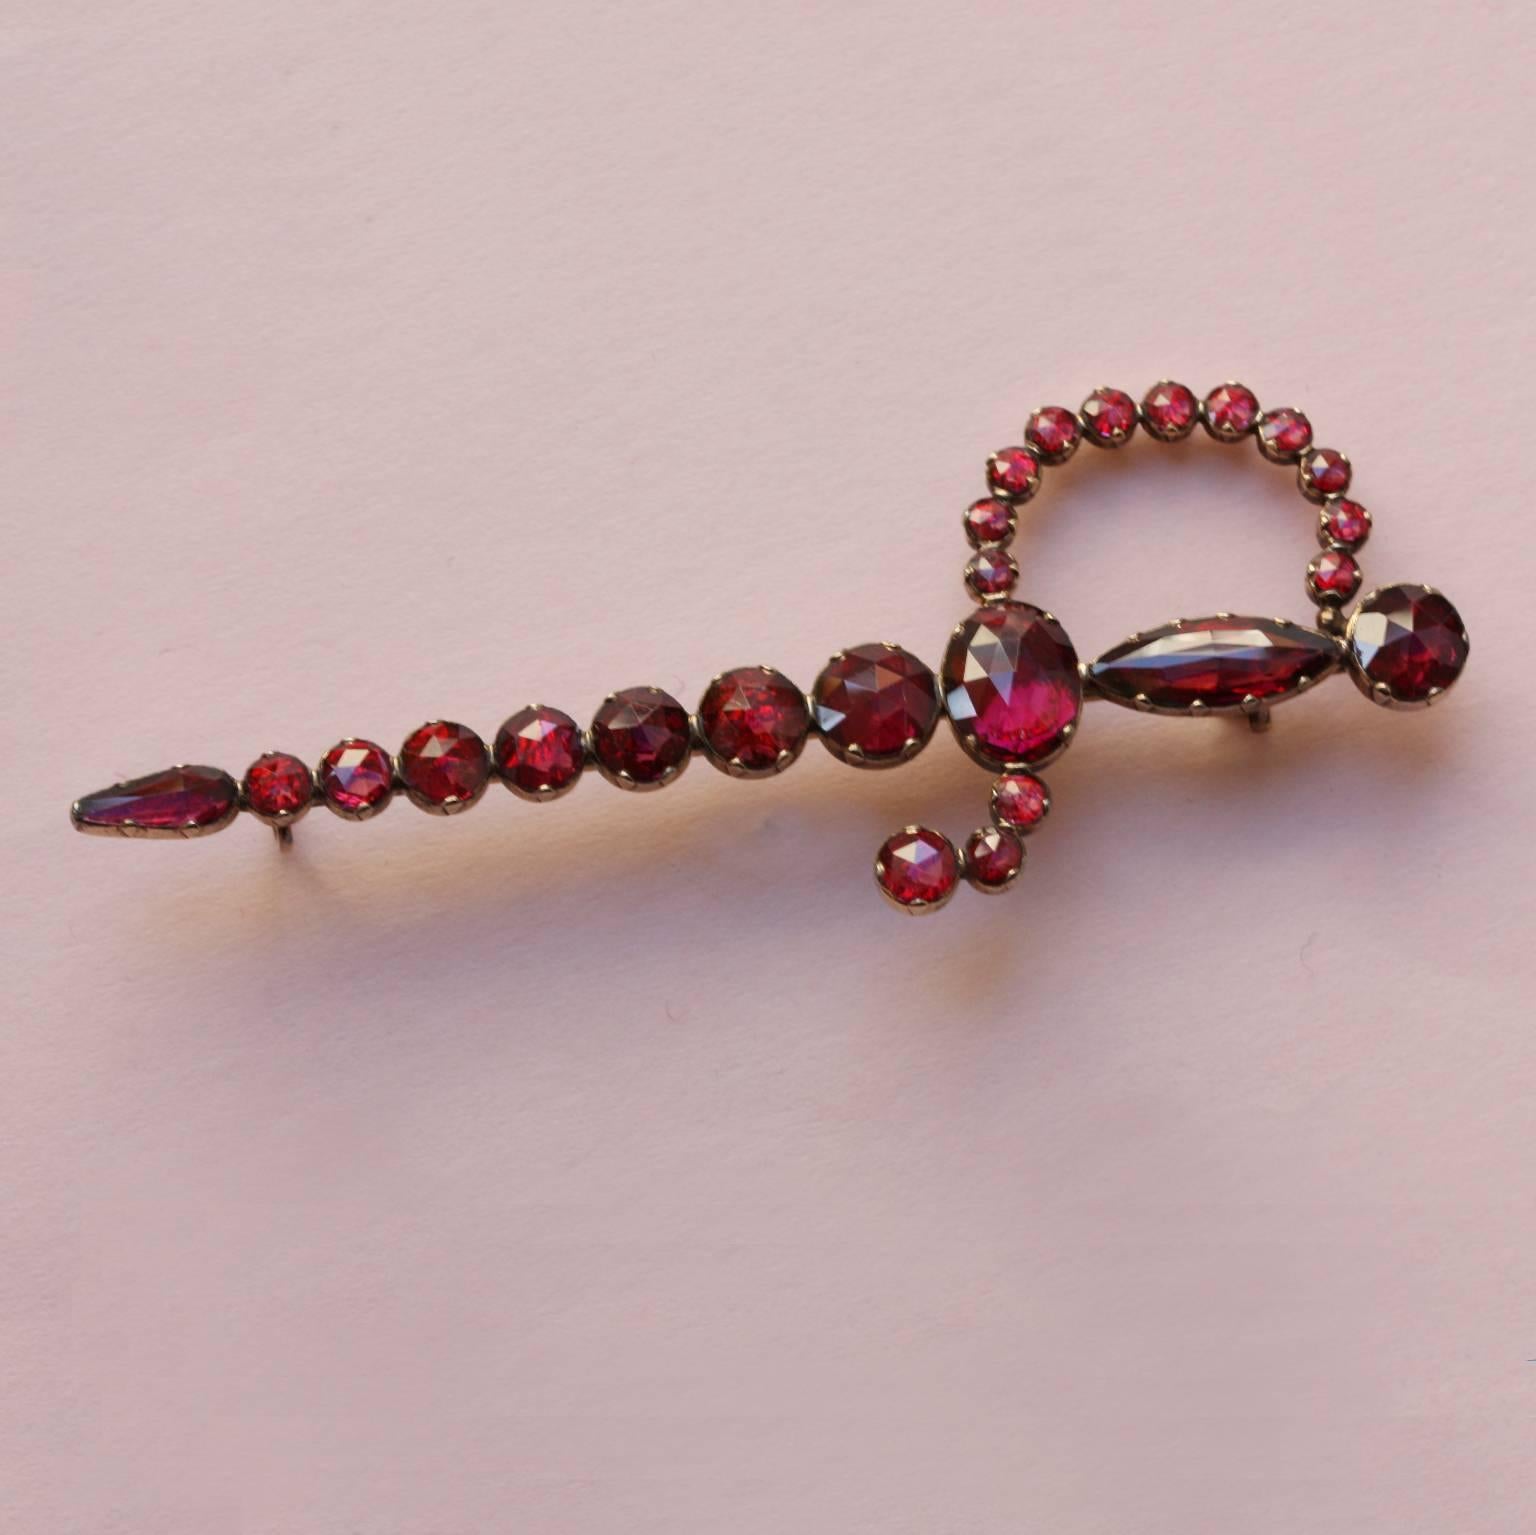 An 18 carat gold brooch in the shape of a sword or dagger, set with 25 rose cut and pink foiled pyrope garnets, 19th century, France.

weight: 7 grams
dimensions: 7.5 x 3 cm